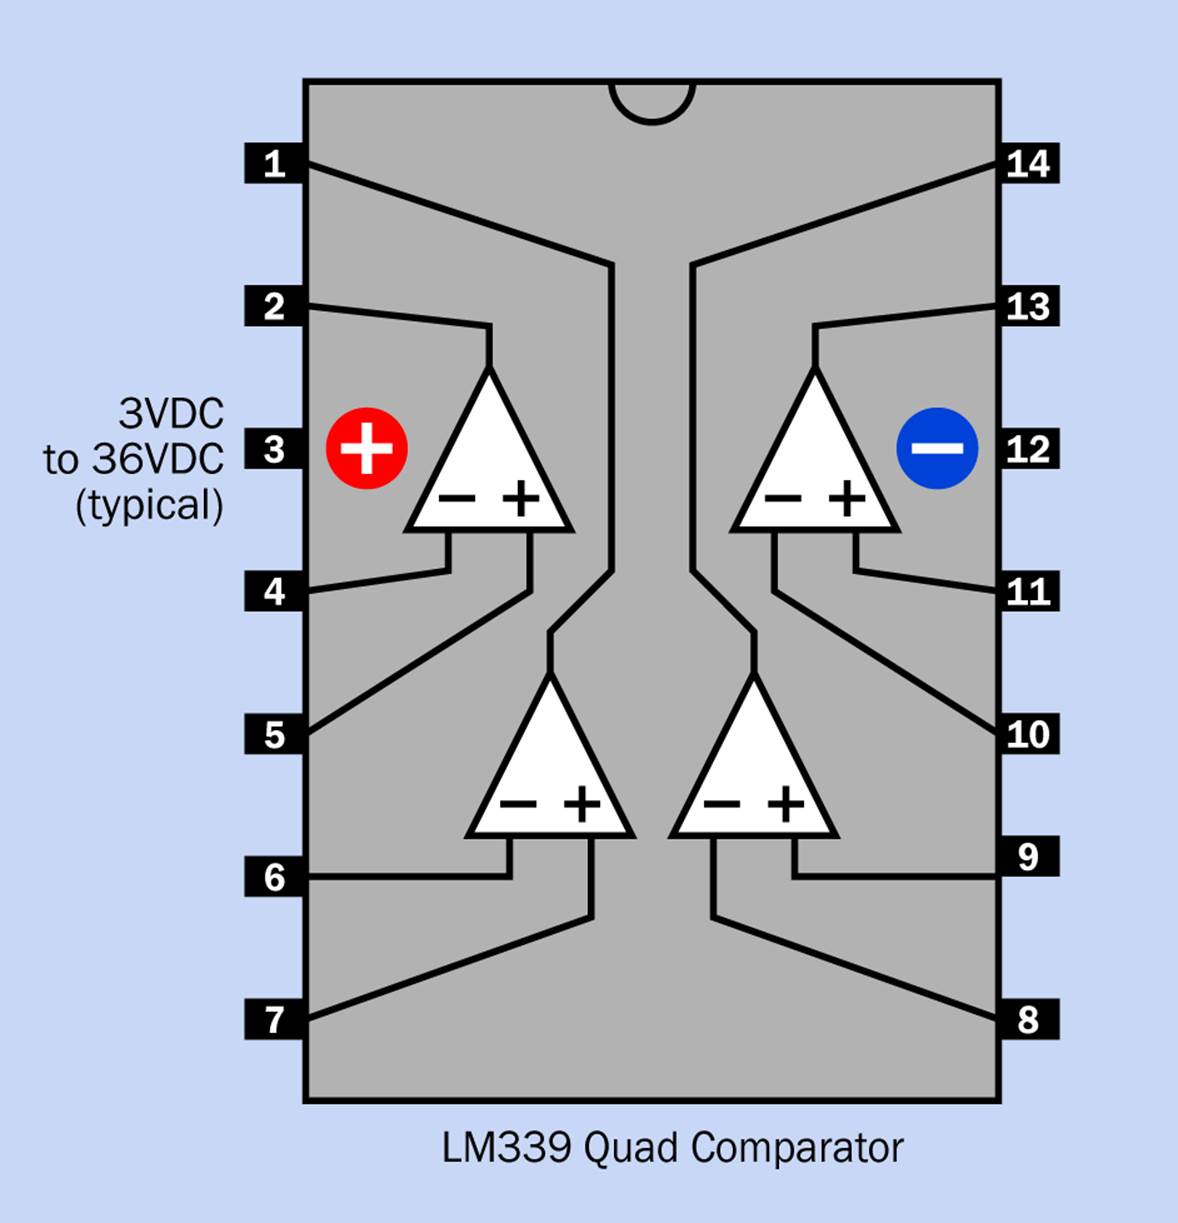 Four comparators are built into the LM339 chip.